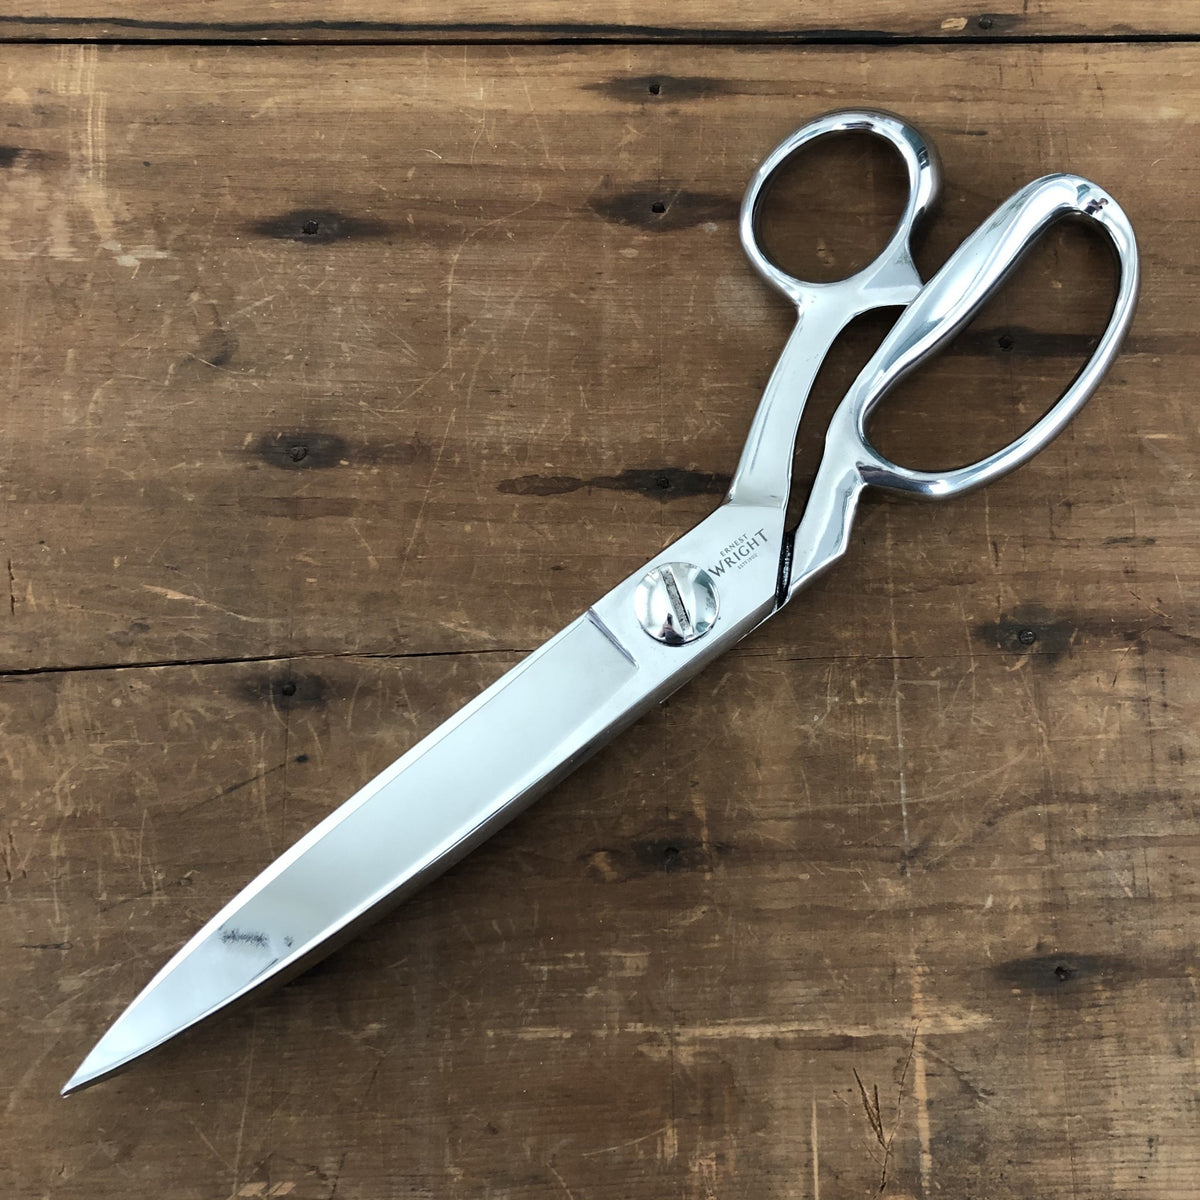 Ernest Wright 12" Hardened Industial Shears - Carbon Steel